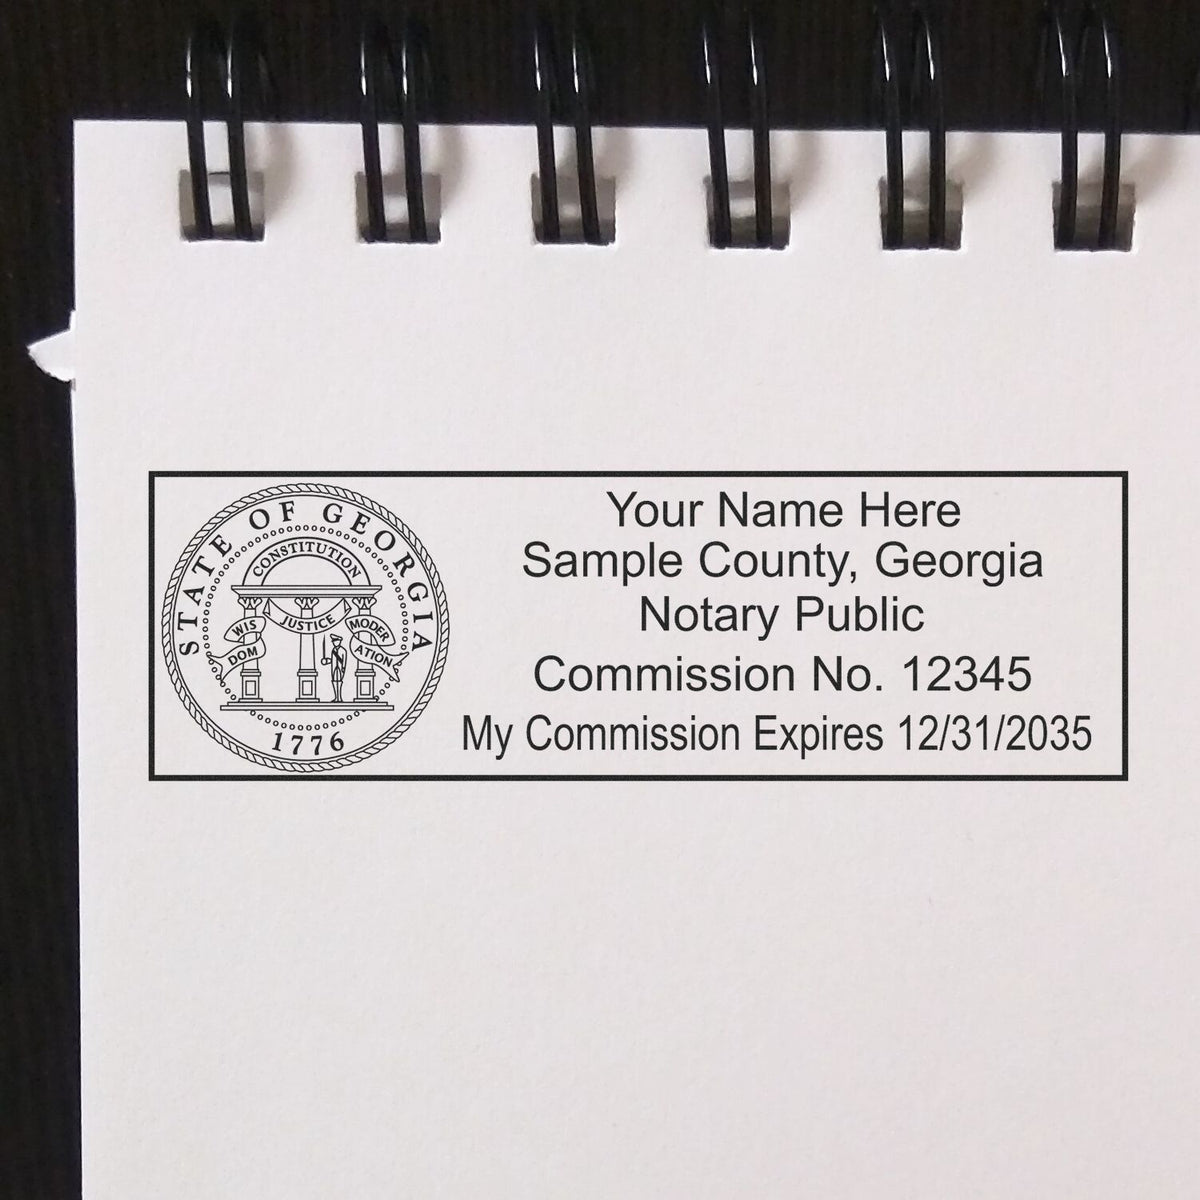 The main image for the Wooden Handle Georgia Rectangular Notary Public Stamp depicting a sample of the imprint and electronic files